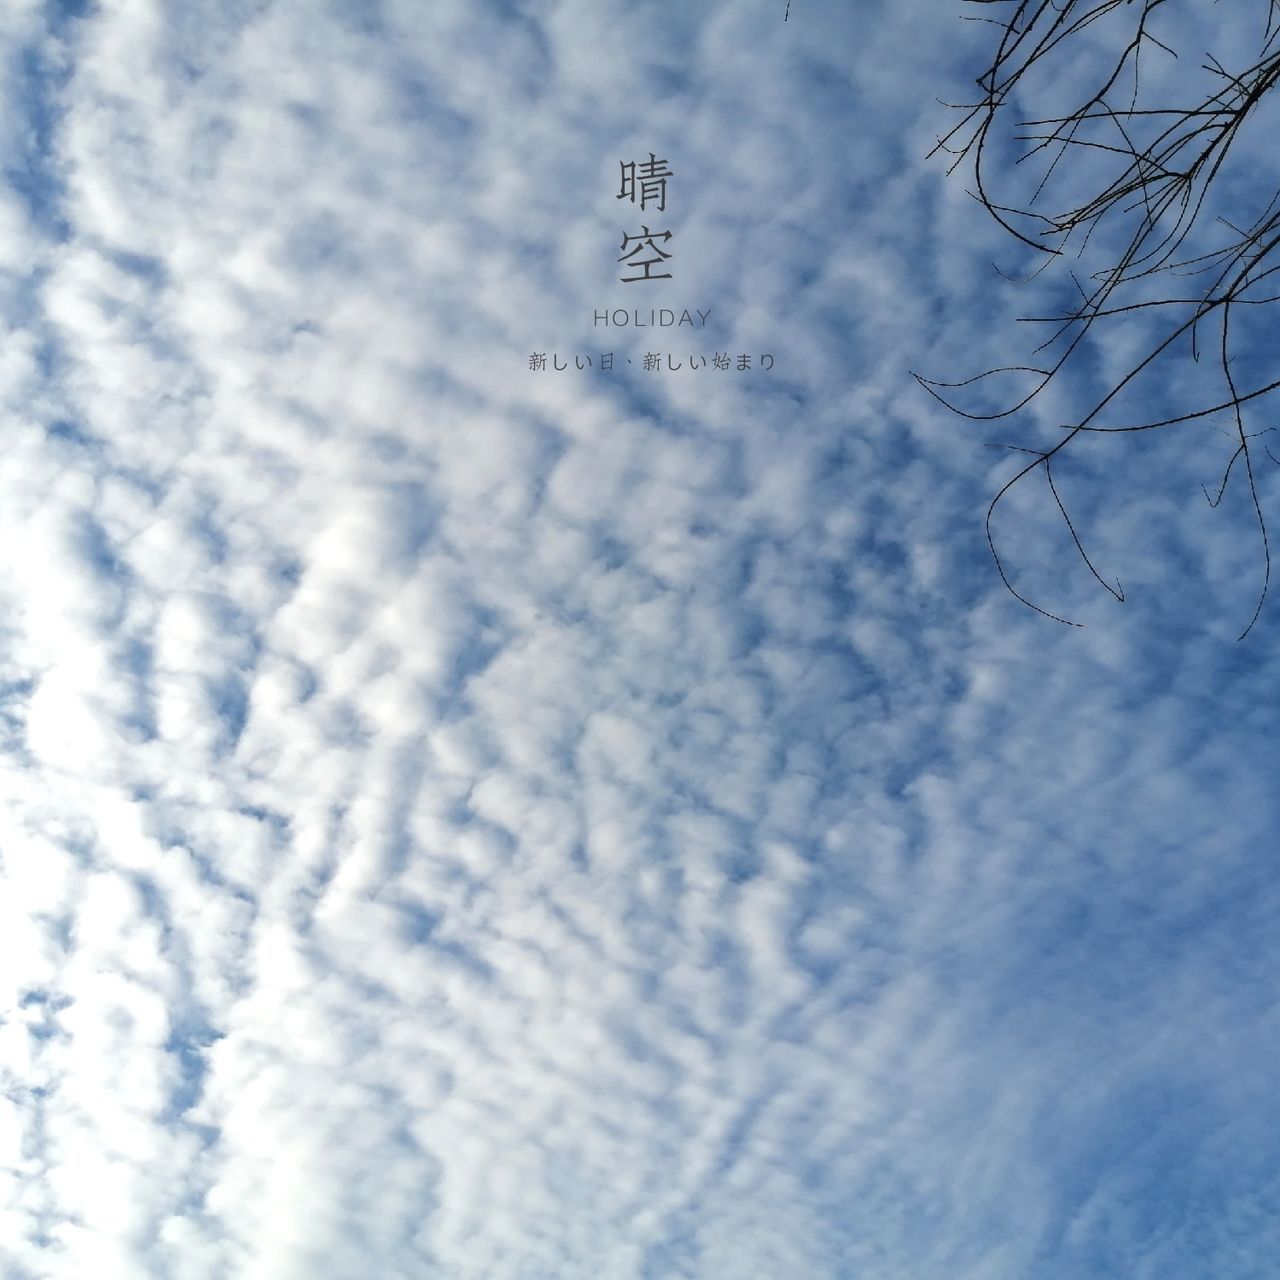 cloud - sky, no people, sky, nature, blue, day, outdoors, beauty in nature, winter, selective focus, white color, low angle view, tranquility, snow, scenics - nature, flying, text, tranquil scene, sunlight